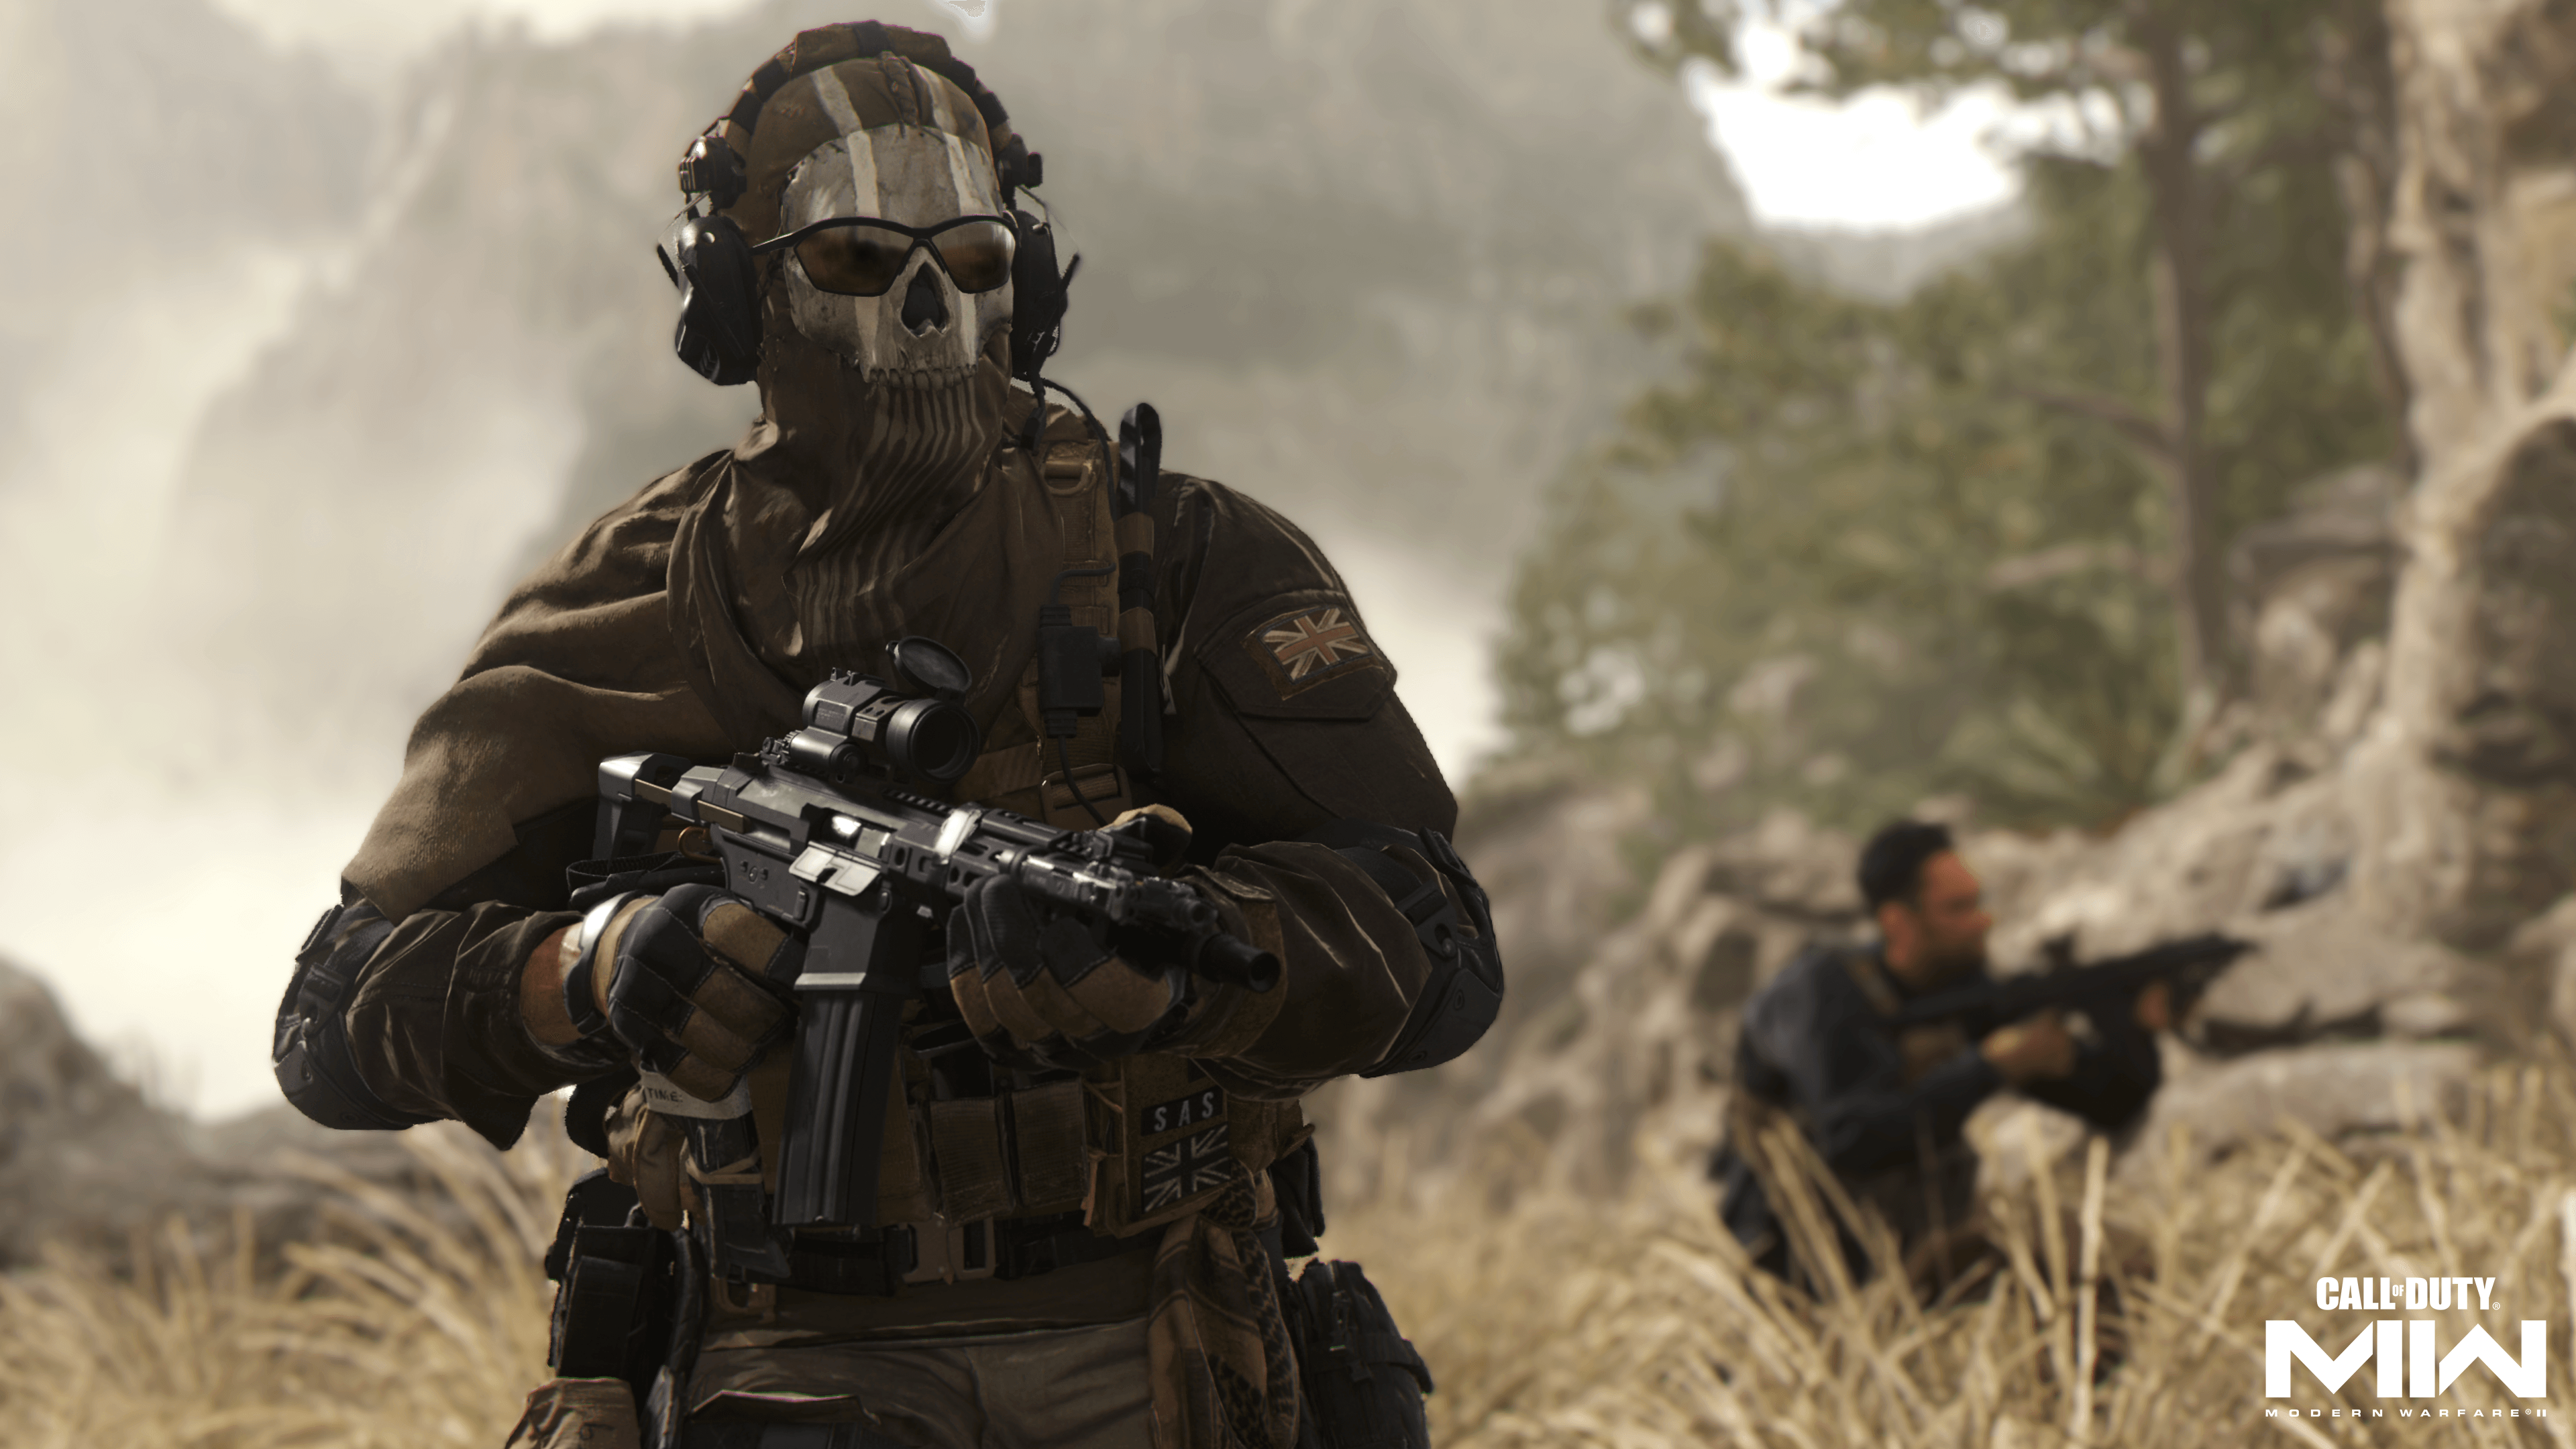 Microsoft and Sony Co-Sign Agreement to Keep Call of Duty on PlayStation  for a Decade